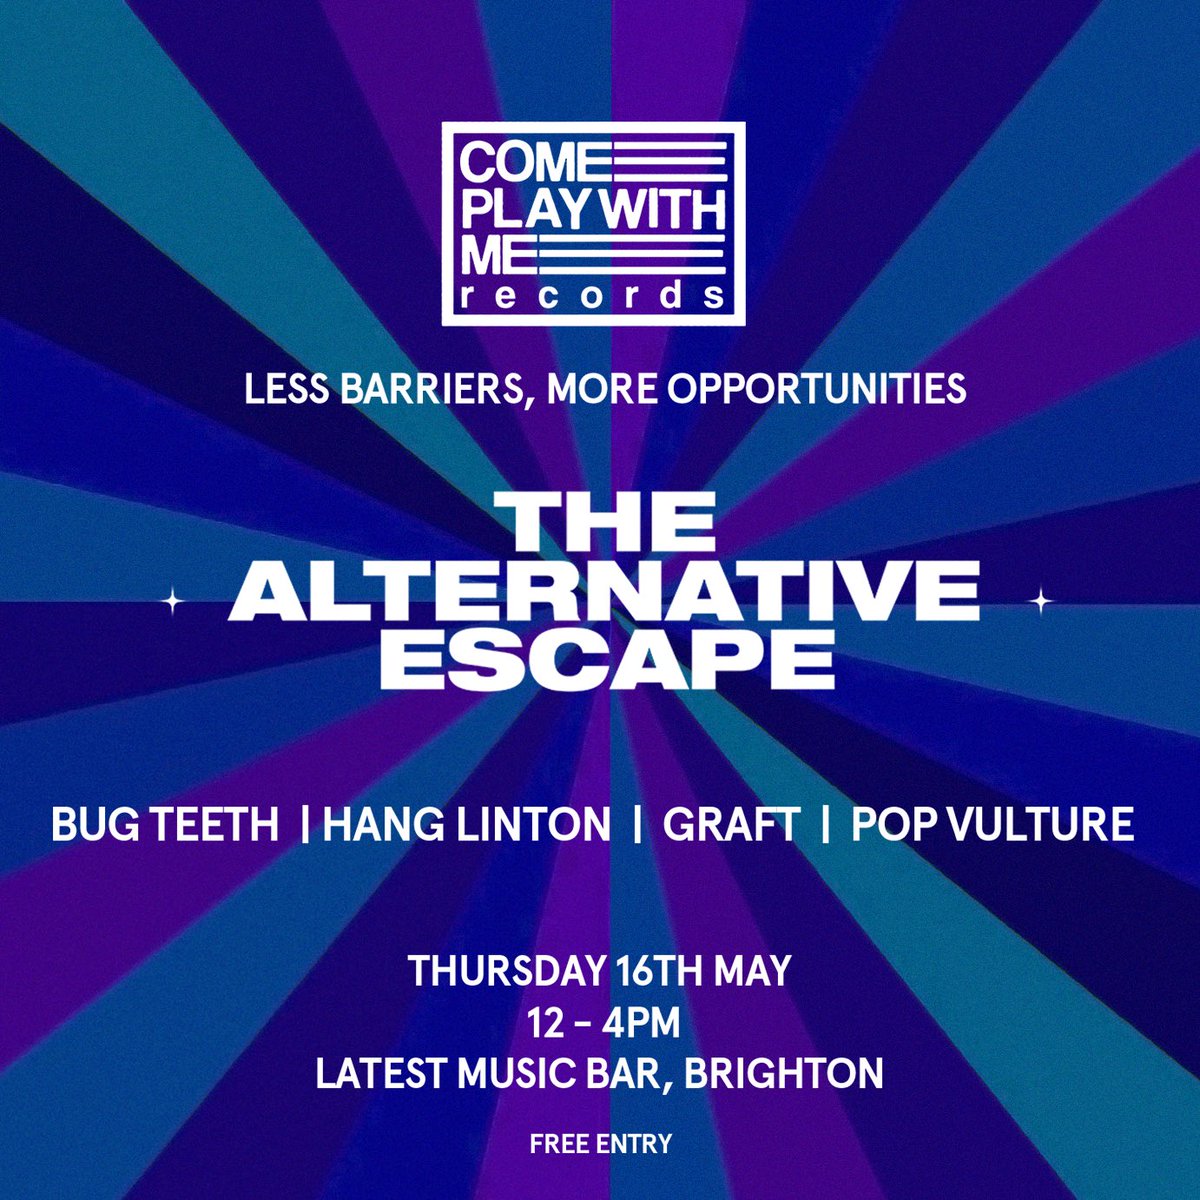 BRIGHTON! We shall be at the Alternative Great Escape in 3 weeks alongside our @CPWMRecords label mates @bugteethuk @iamgraft and @hang_linton Thursday 17th of May @latestmusicbar 12pm A hell of a stage, and a hell of a lot cheaper than the official @thegreatescape (FREE!)